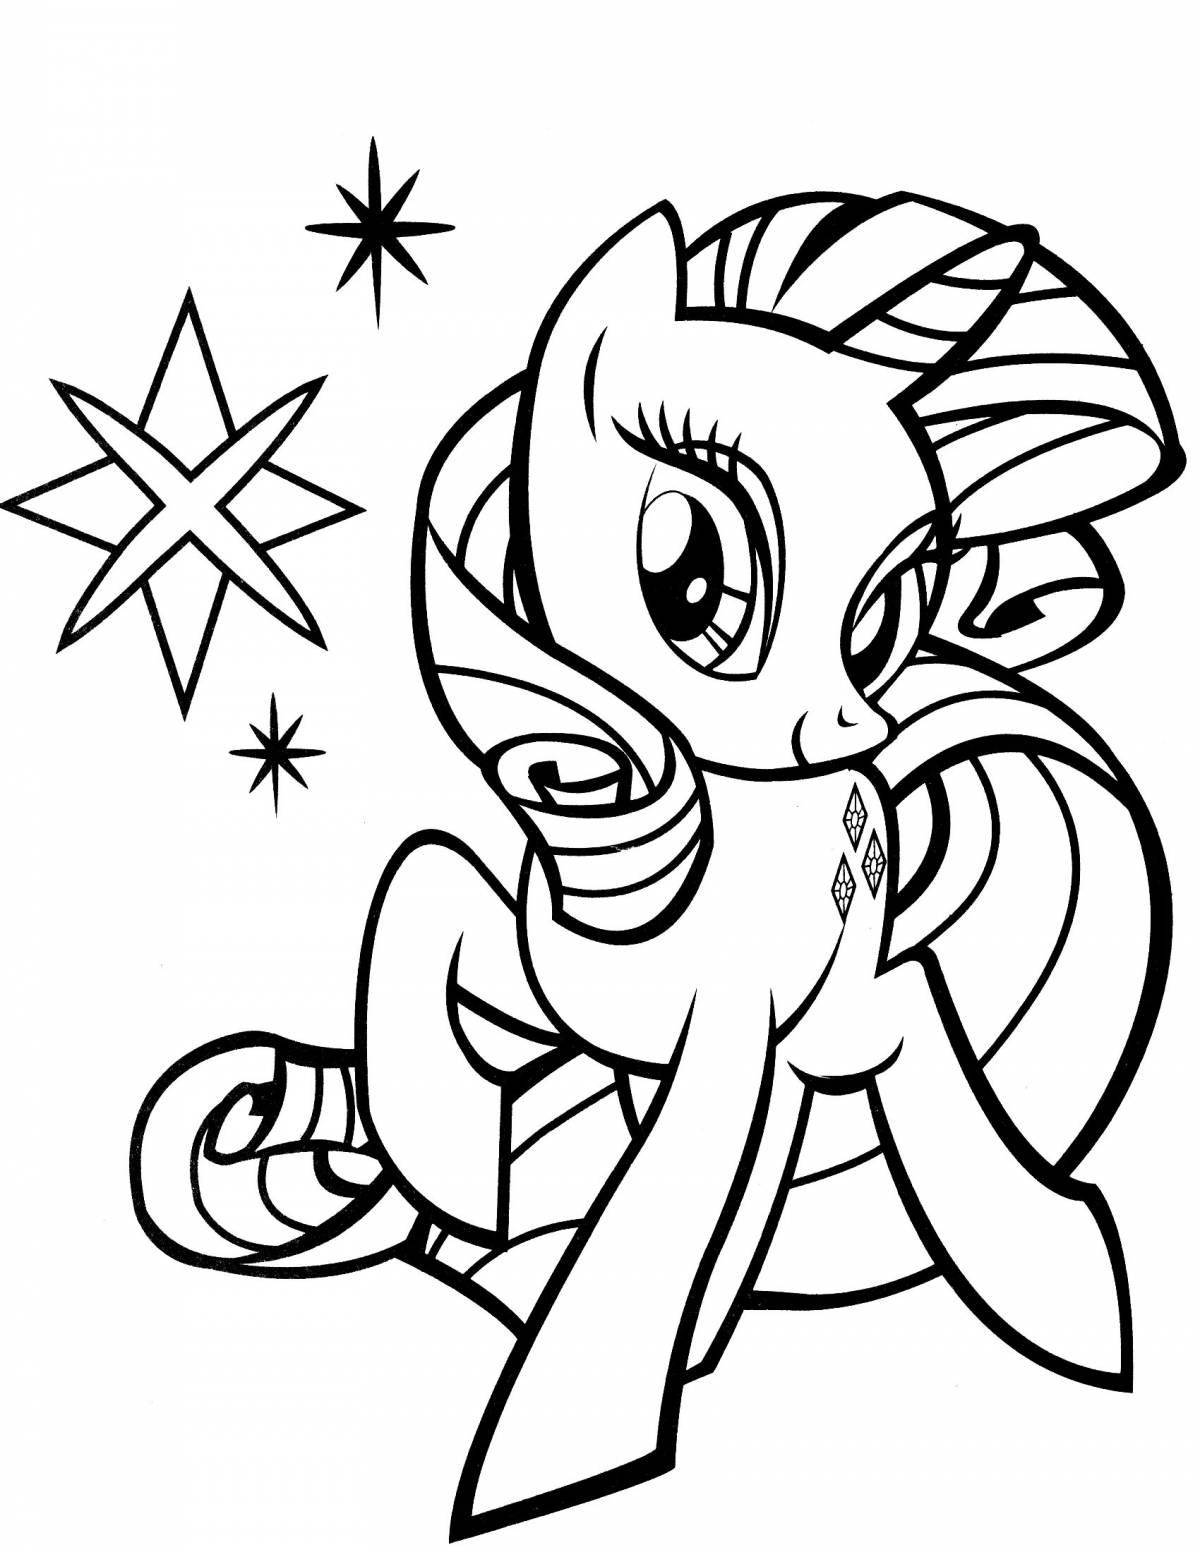 Coloring page shiny baby pony